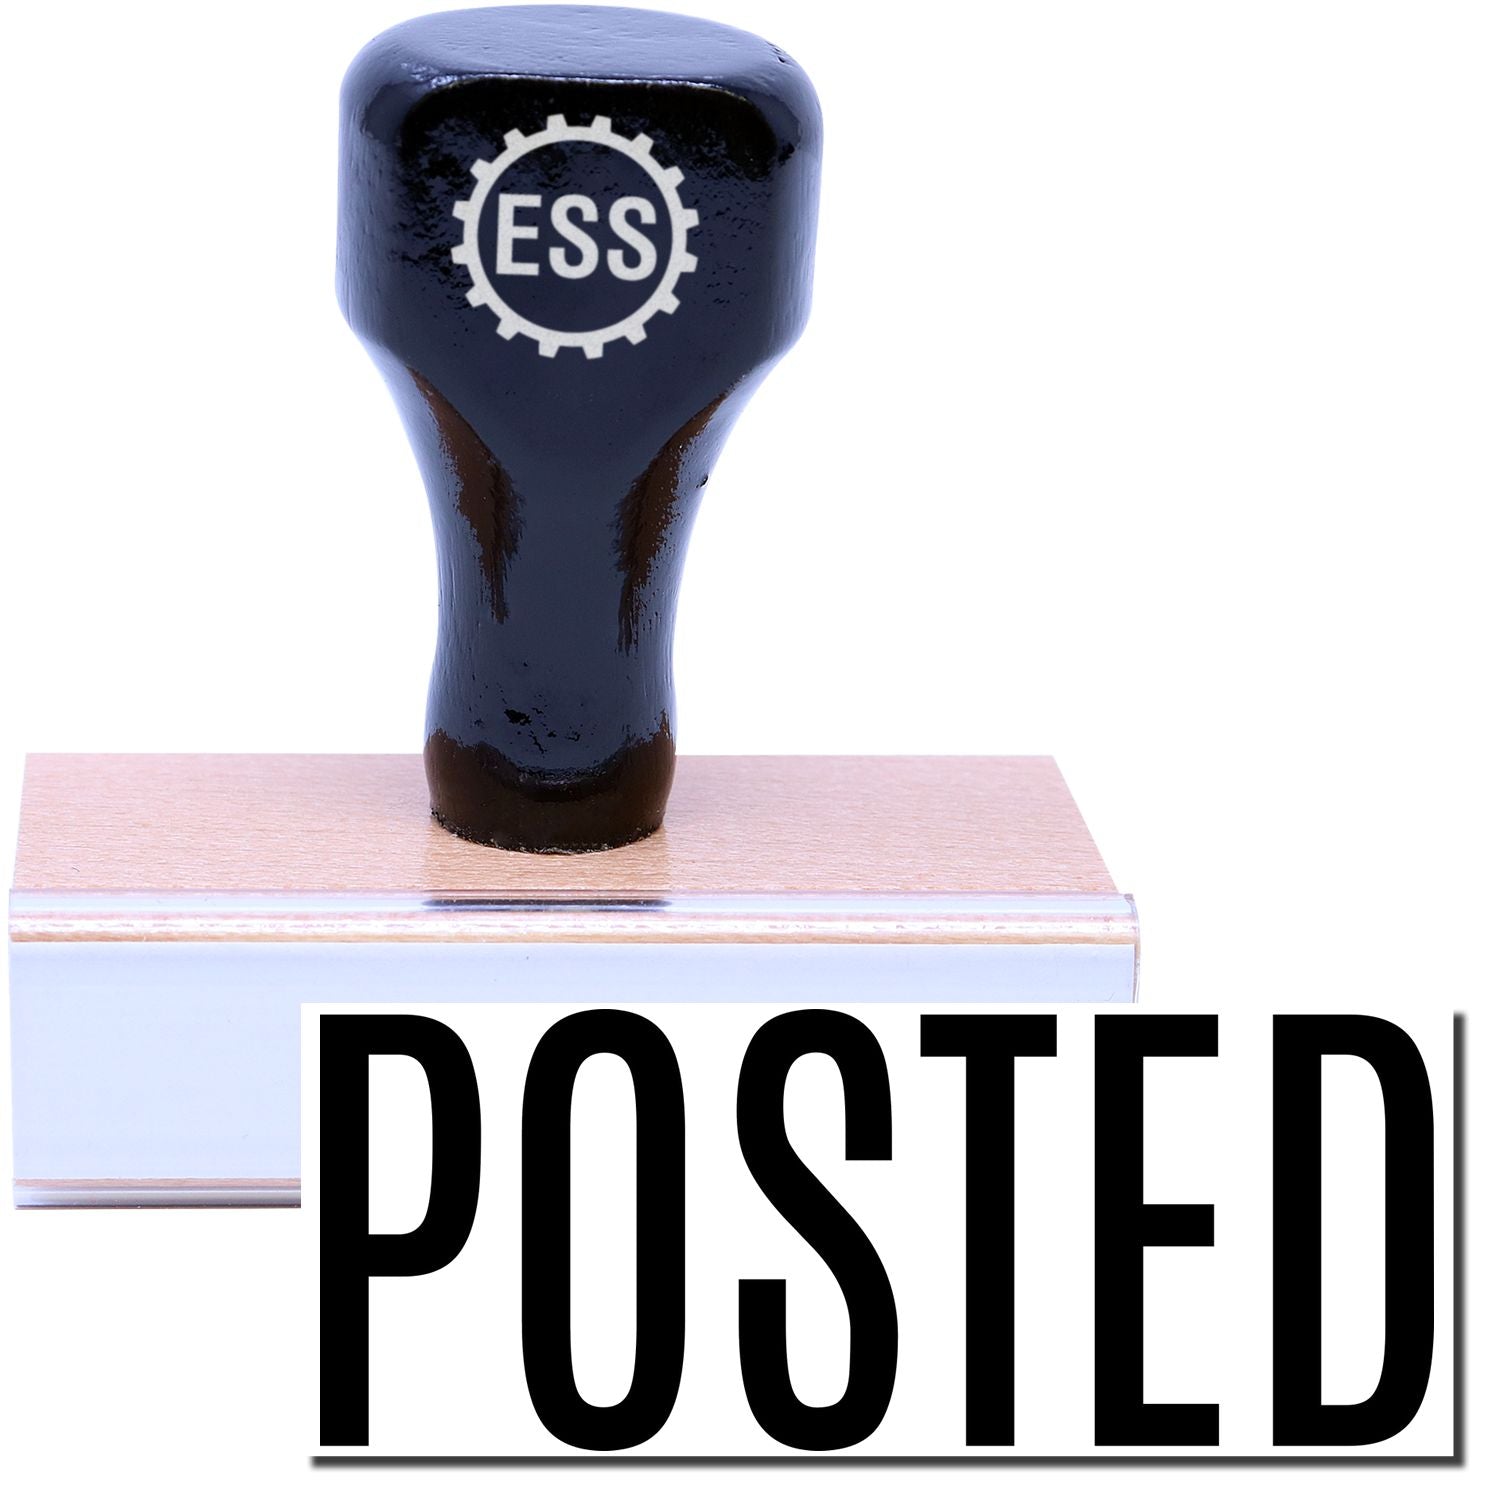 A stock office rubber stamp with a stamped image showing how the text "POSTED" in a large narrow font is displayed after stamping.